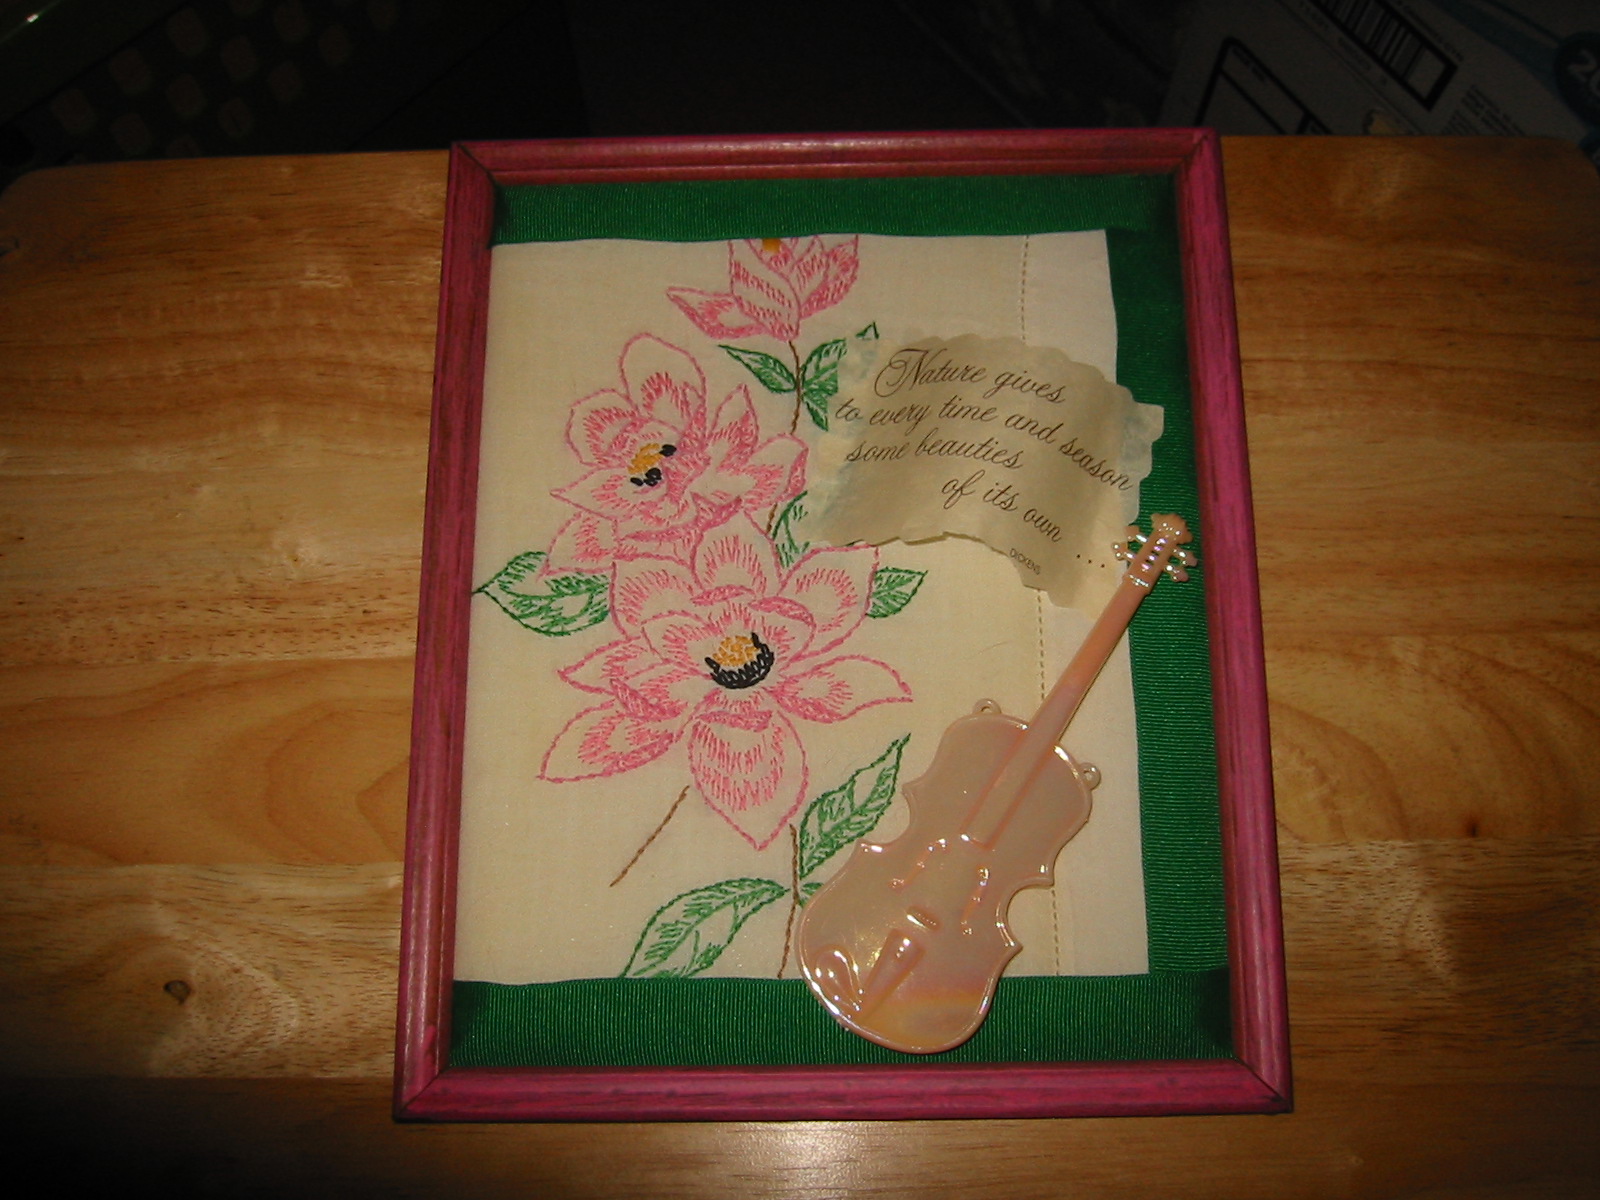 Vintage 1930s Summer Song Wall Art (3-dimensional framed wall piece) by Kay Creatives Designs